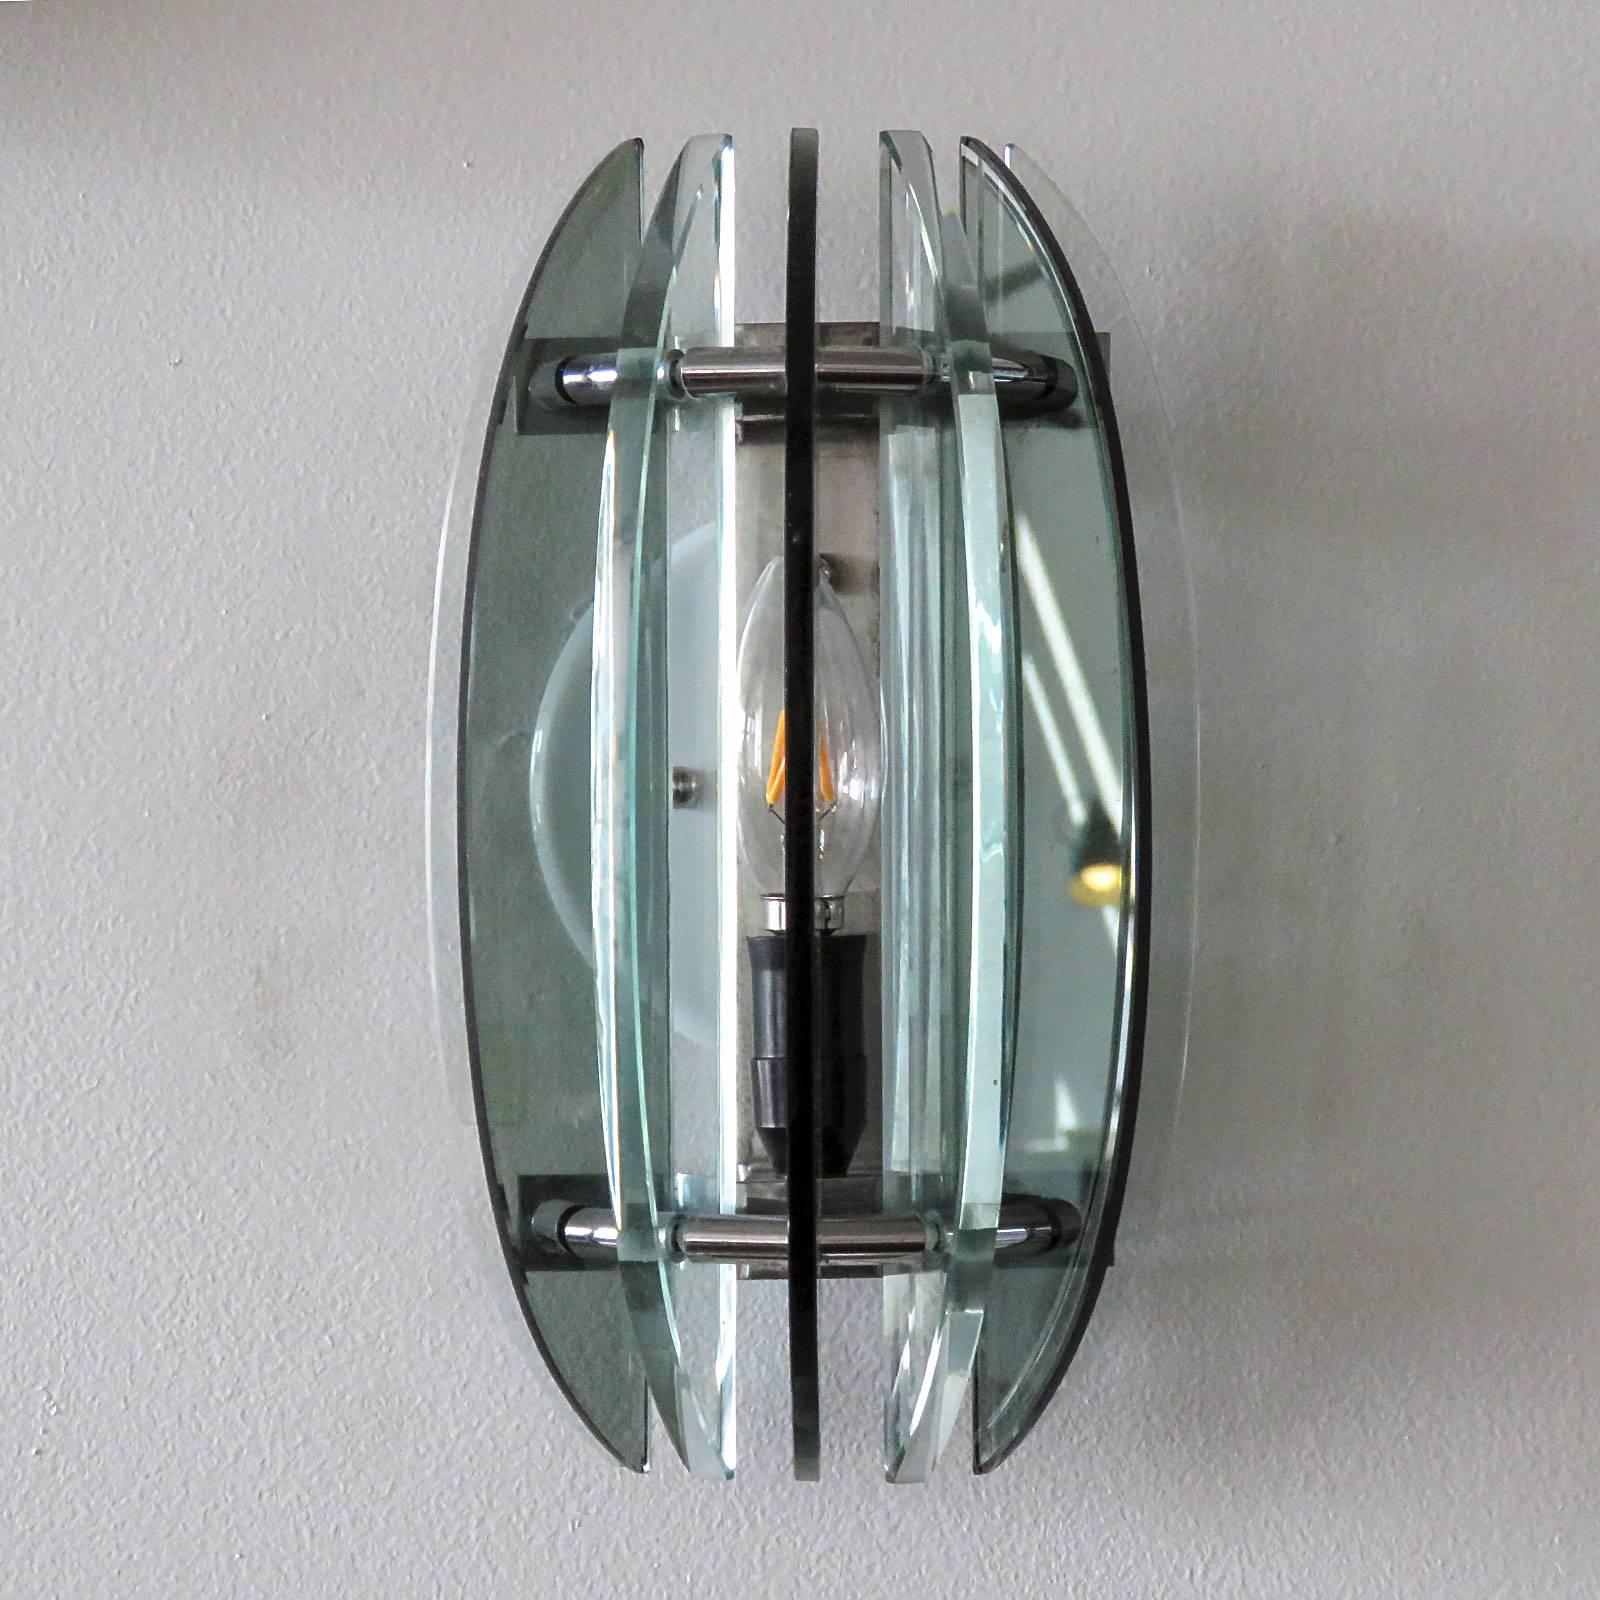 Wonderful Italian glass wall lights by Veca, with alternating clear and green glass panels on a nickel-plated frame. Custom back plates for US j-boxes, rewired for US, one E12 socket per fixture, max. wattage 60w per socket, bulbs provided as a